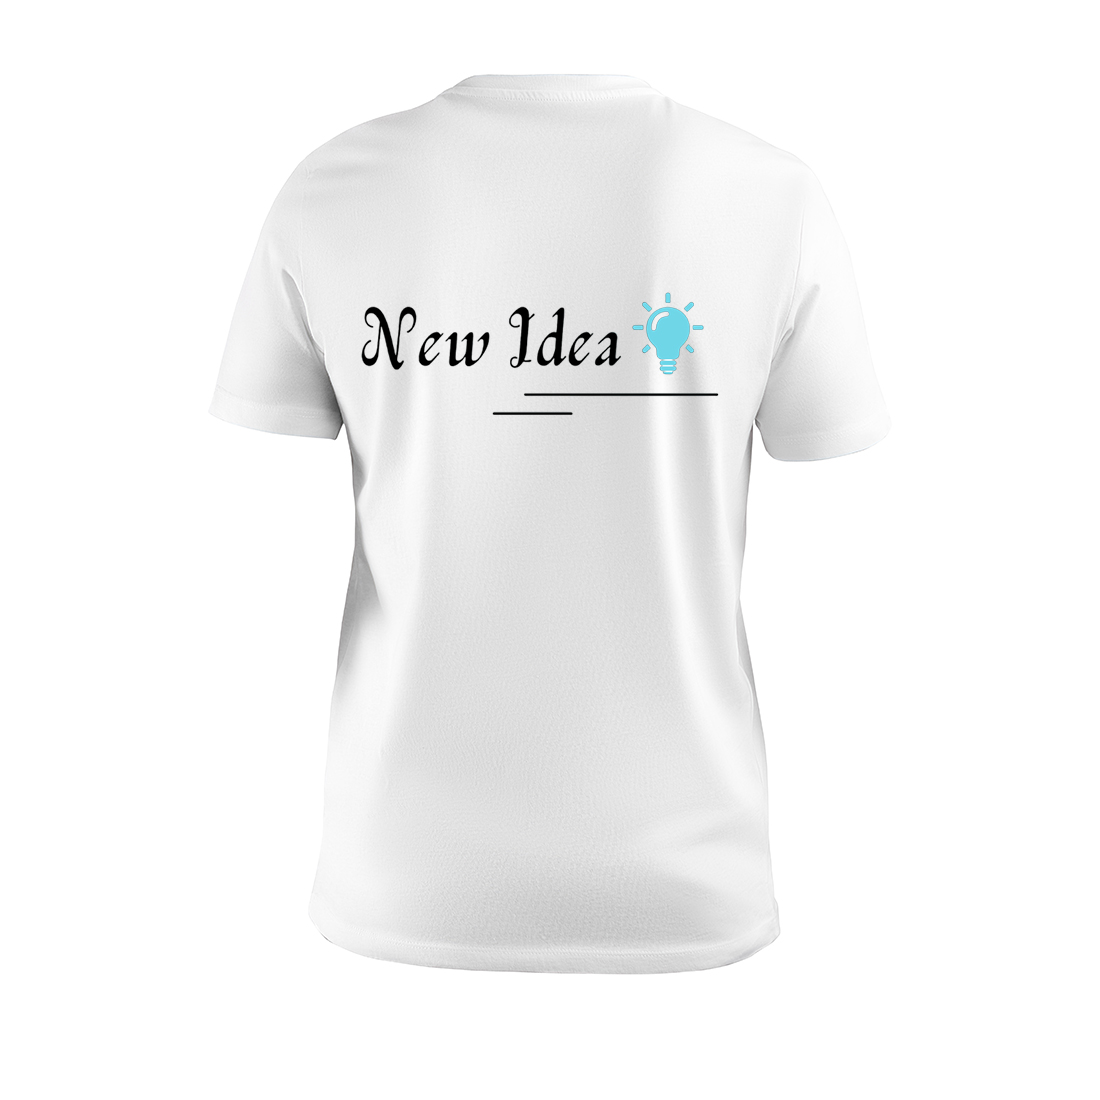 new idea t shirt design for printing 395